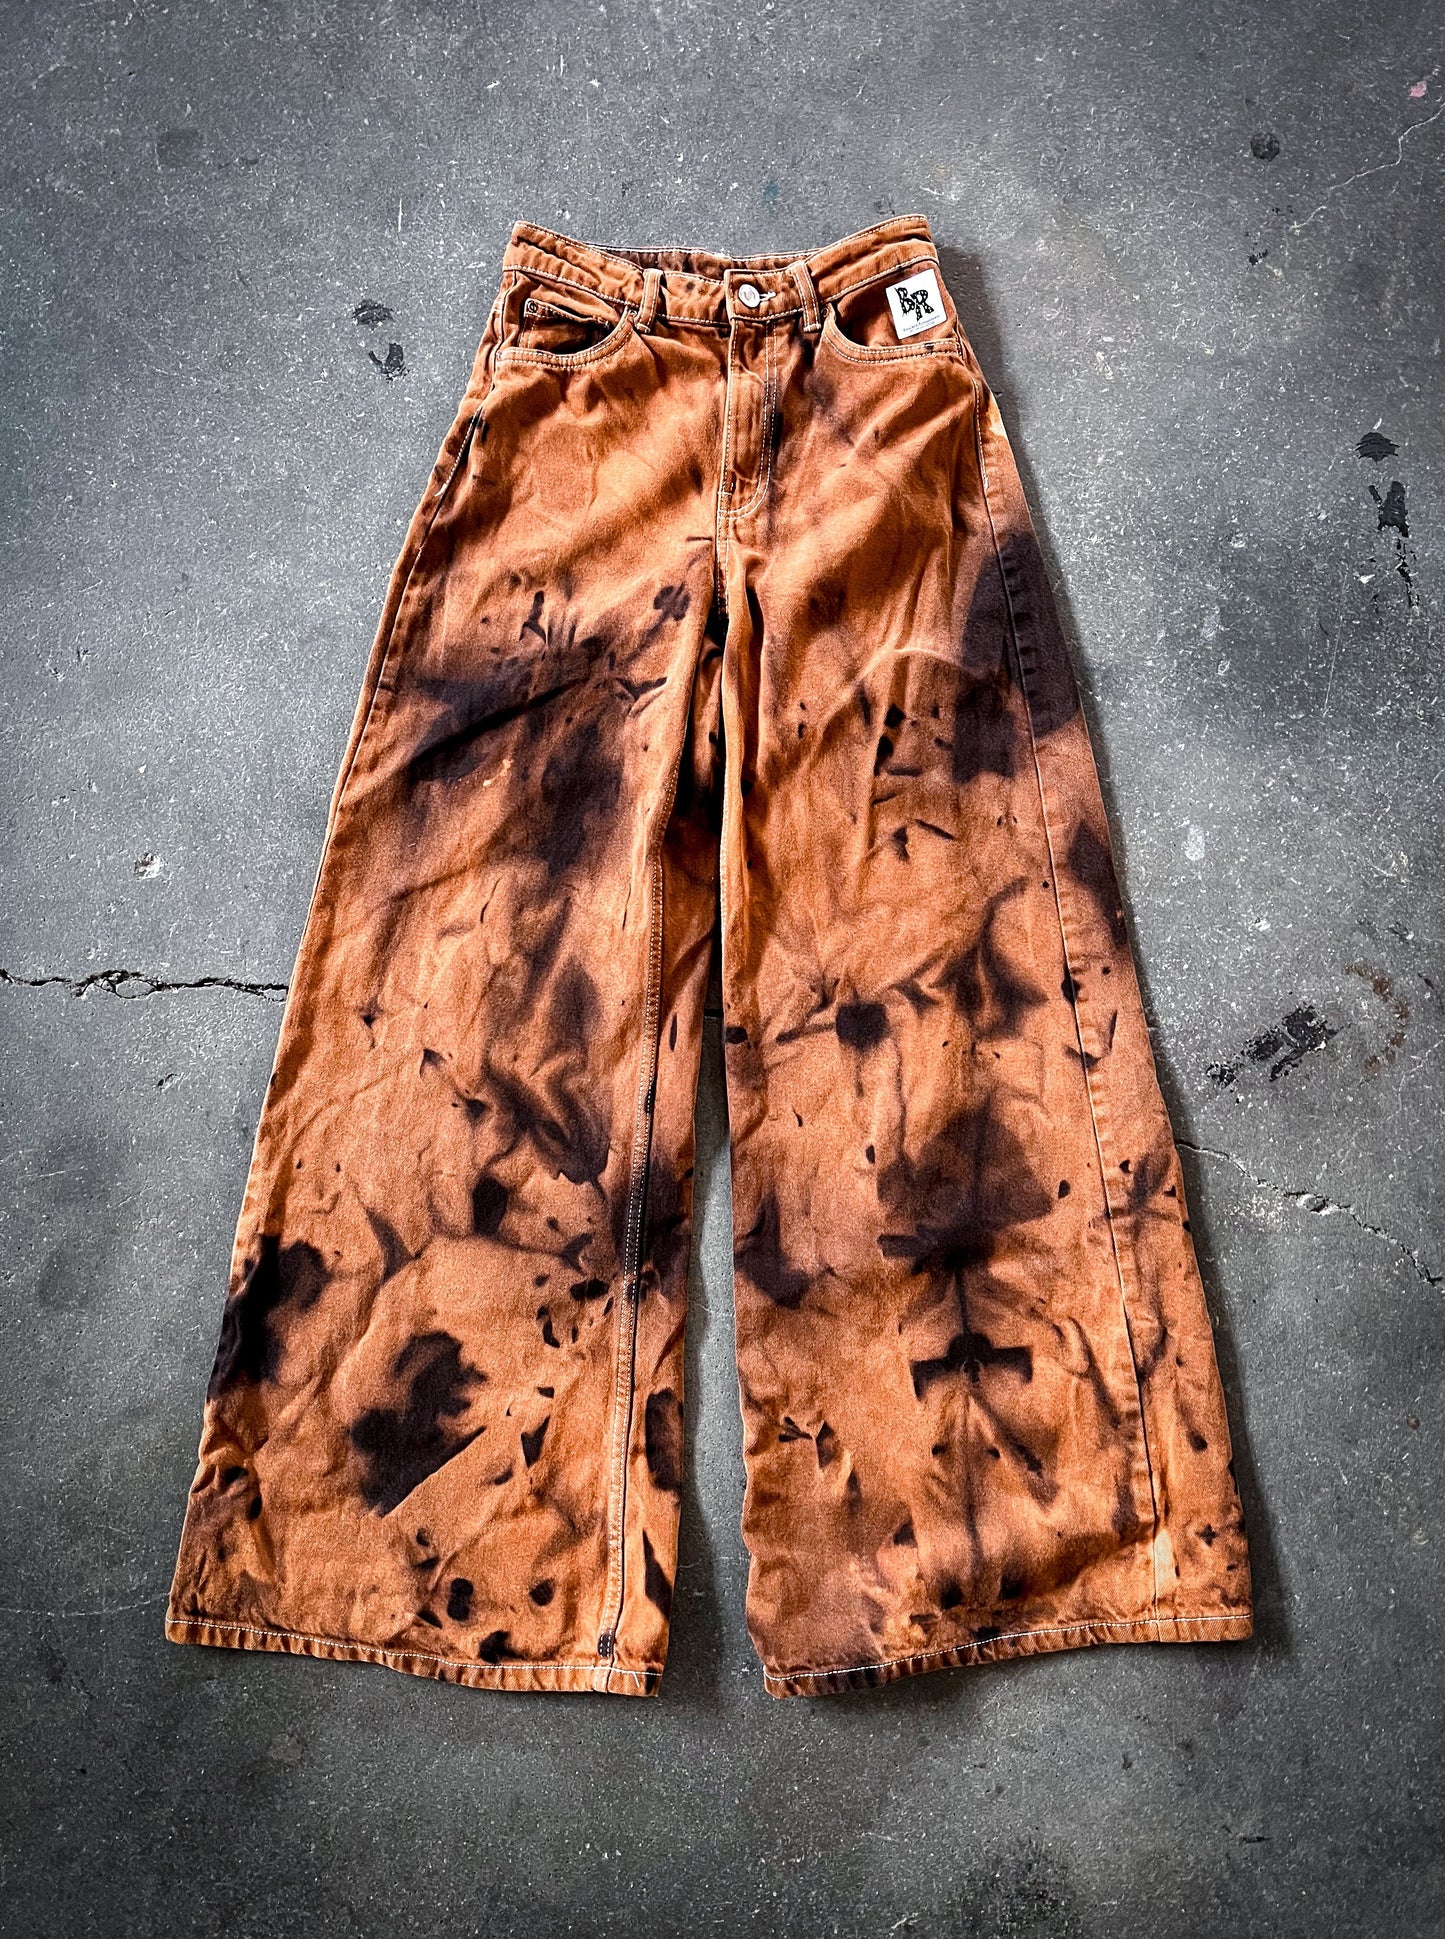 Water Bleached Jeans (#5)